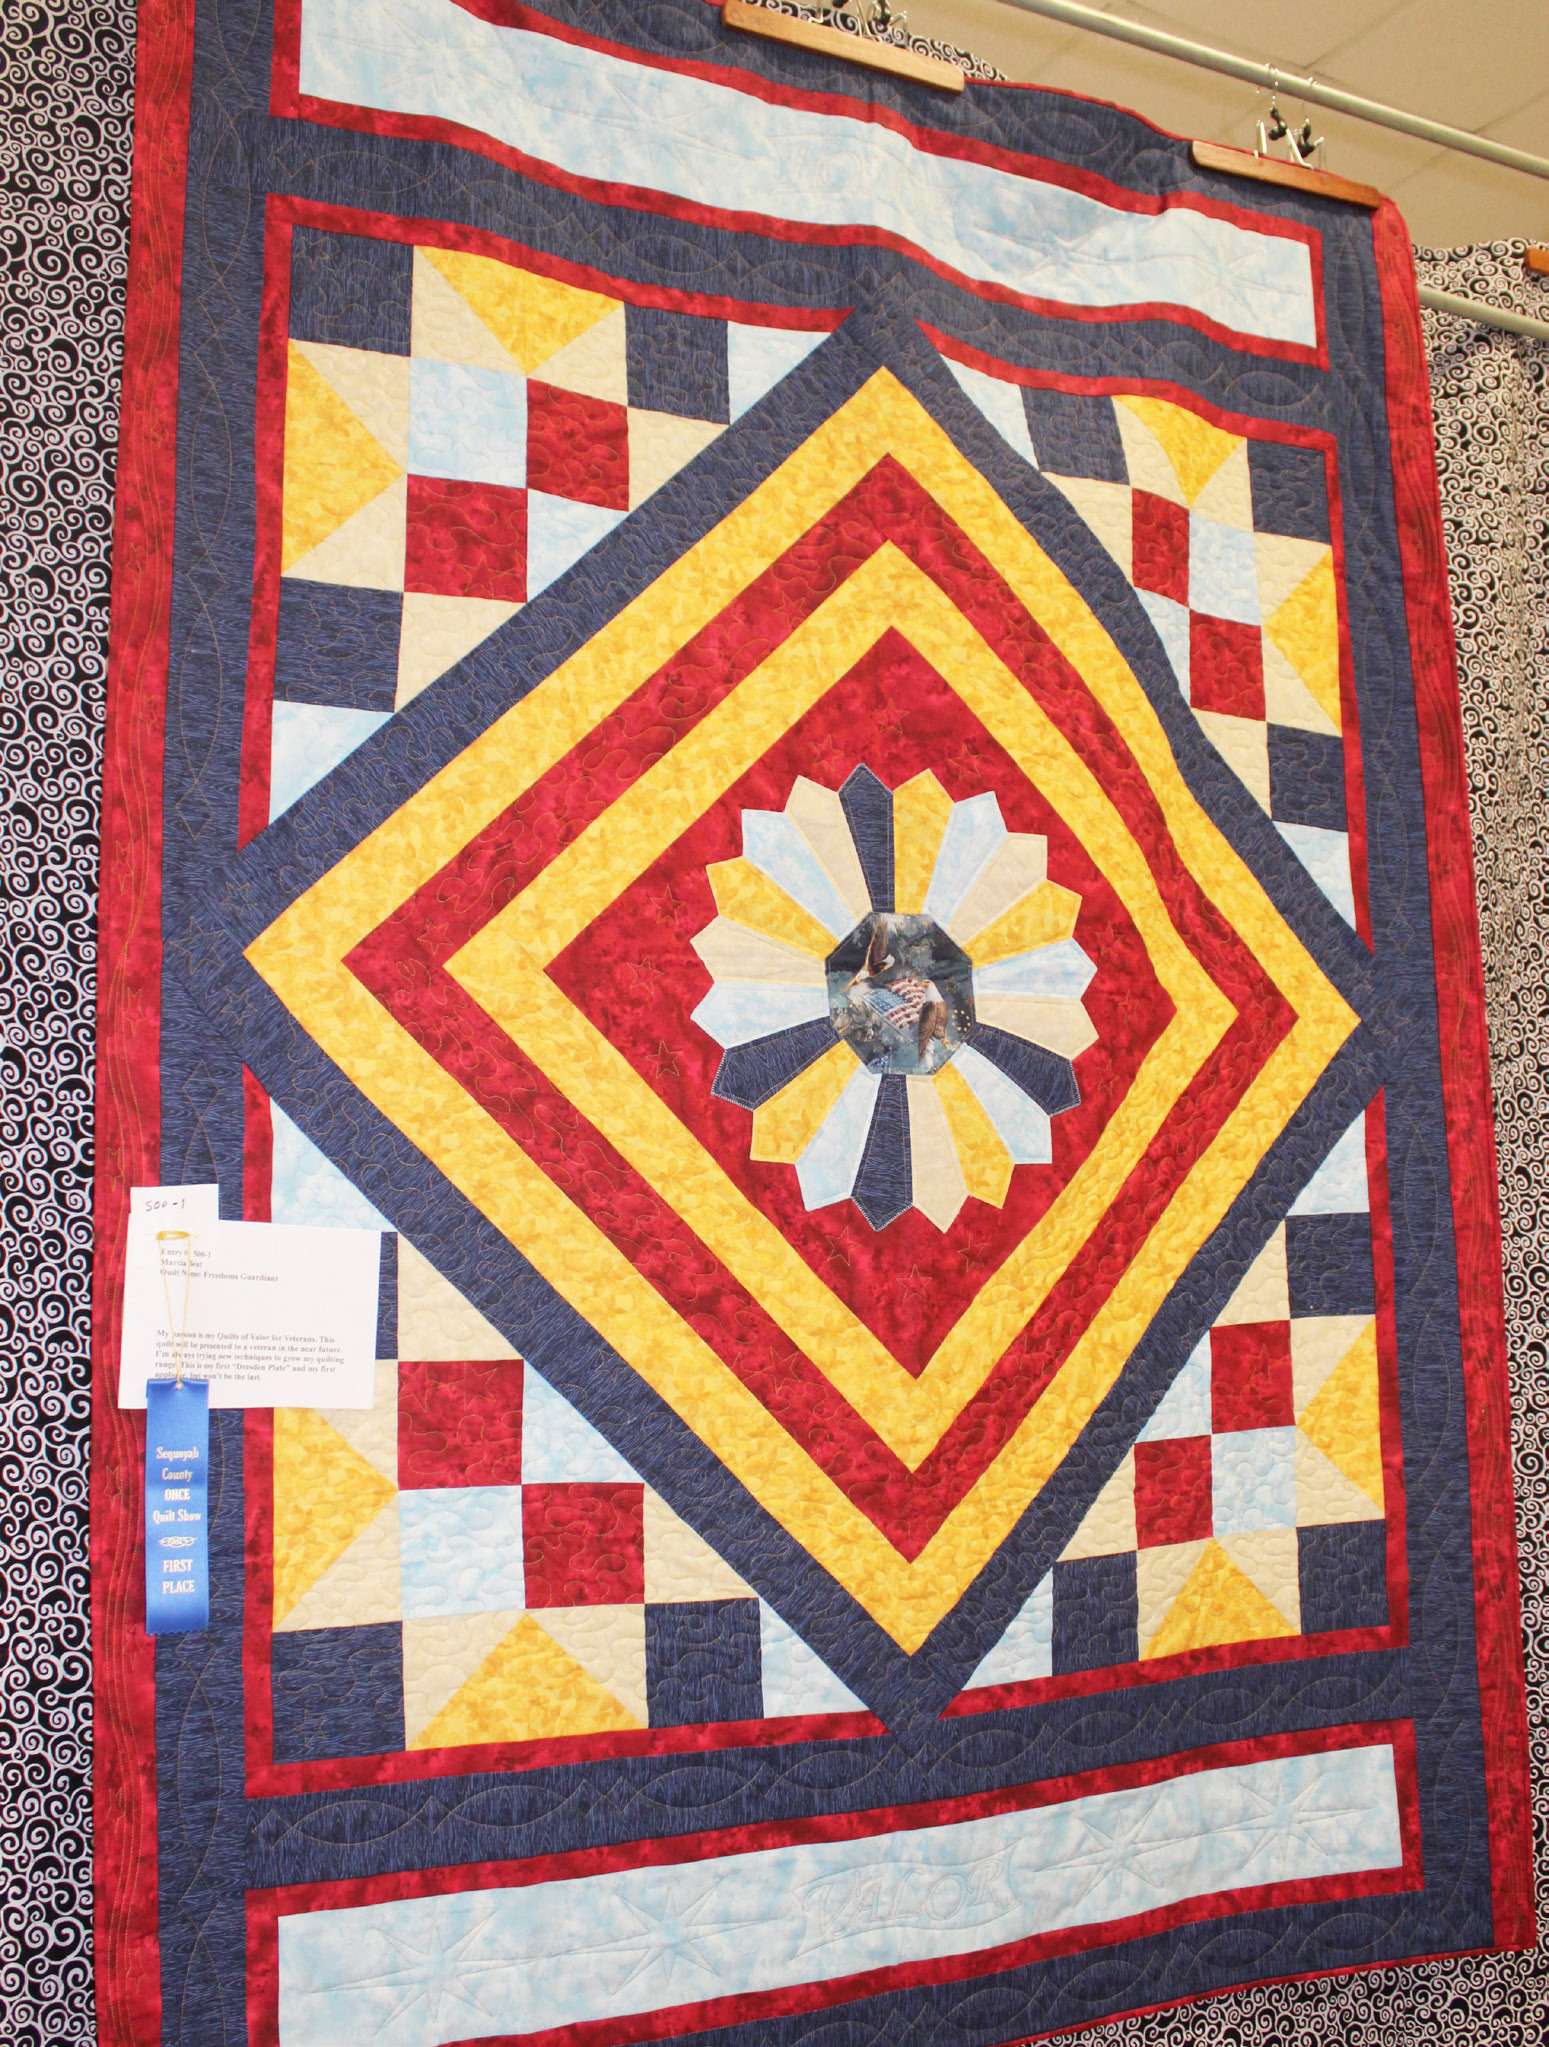 “Freedom Guardians” was the winner of a blue ribbon at the OHCE Quilt Show. The quilt, which received first place in the applique division was made by Marcia Beat. Beat said the quilt, inspired by her passion of “Quilts of Valor” for veterans, will be presented to a veteran in the near future.